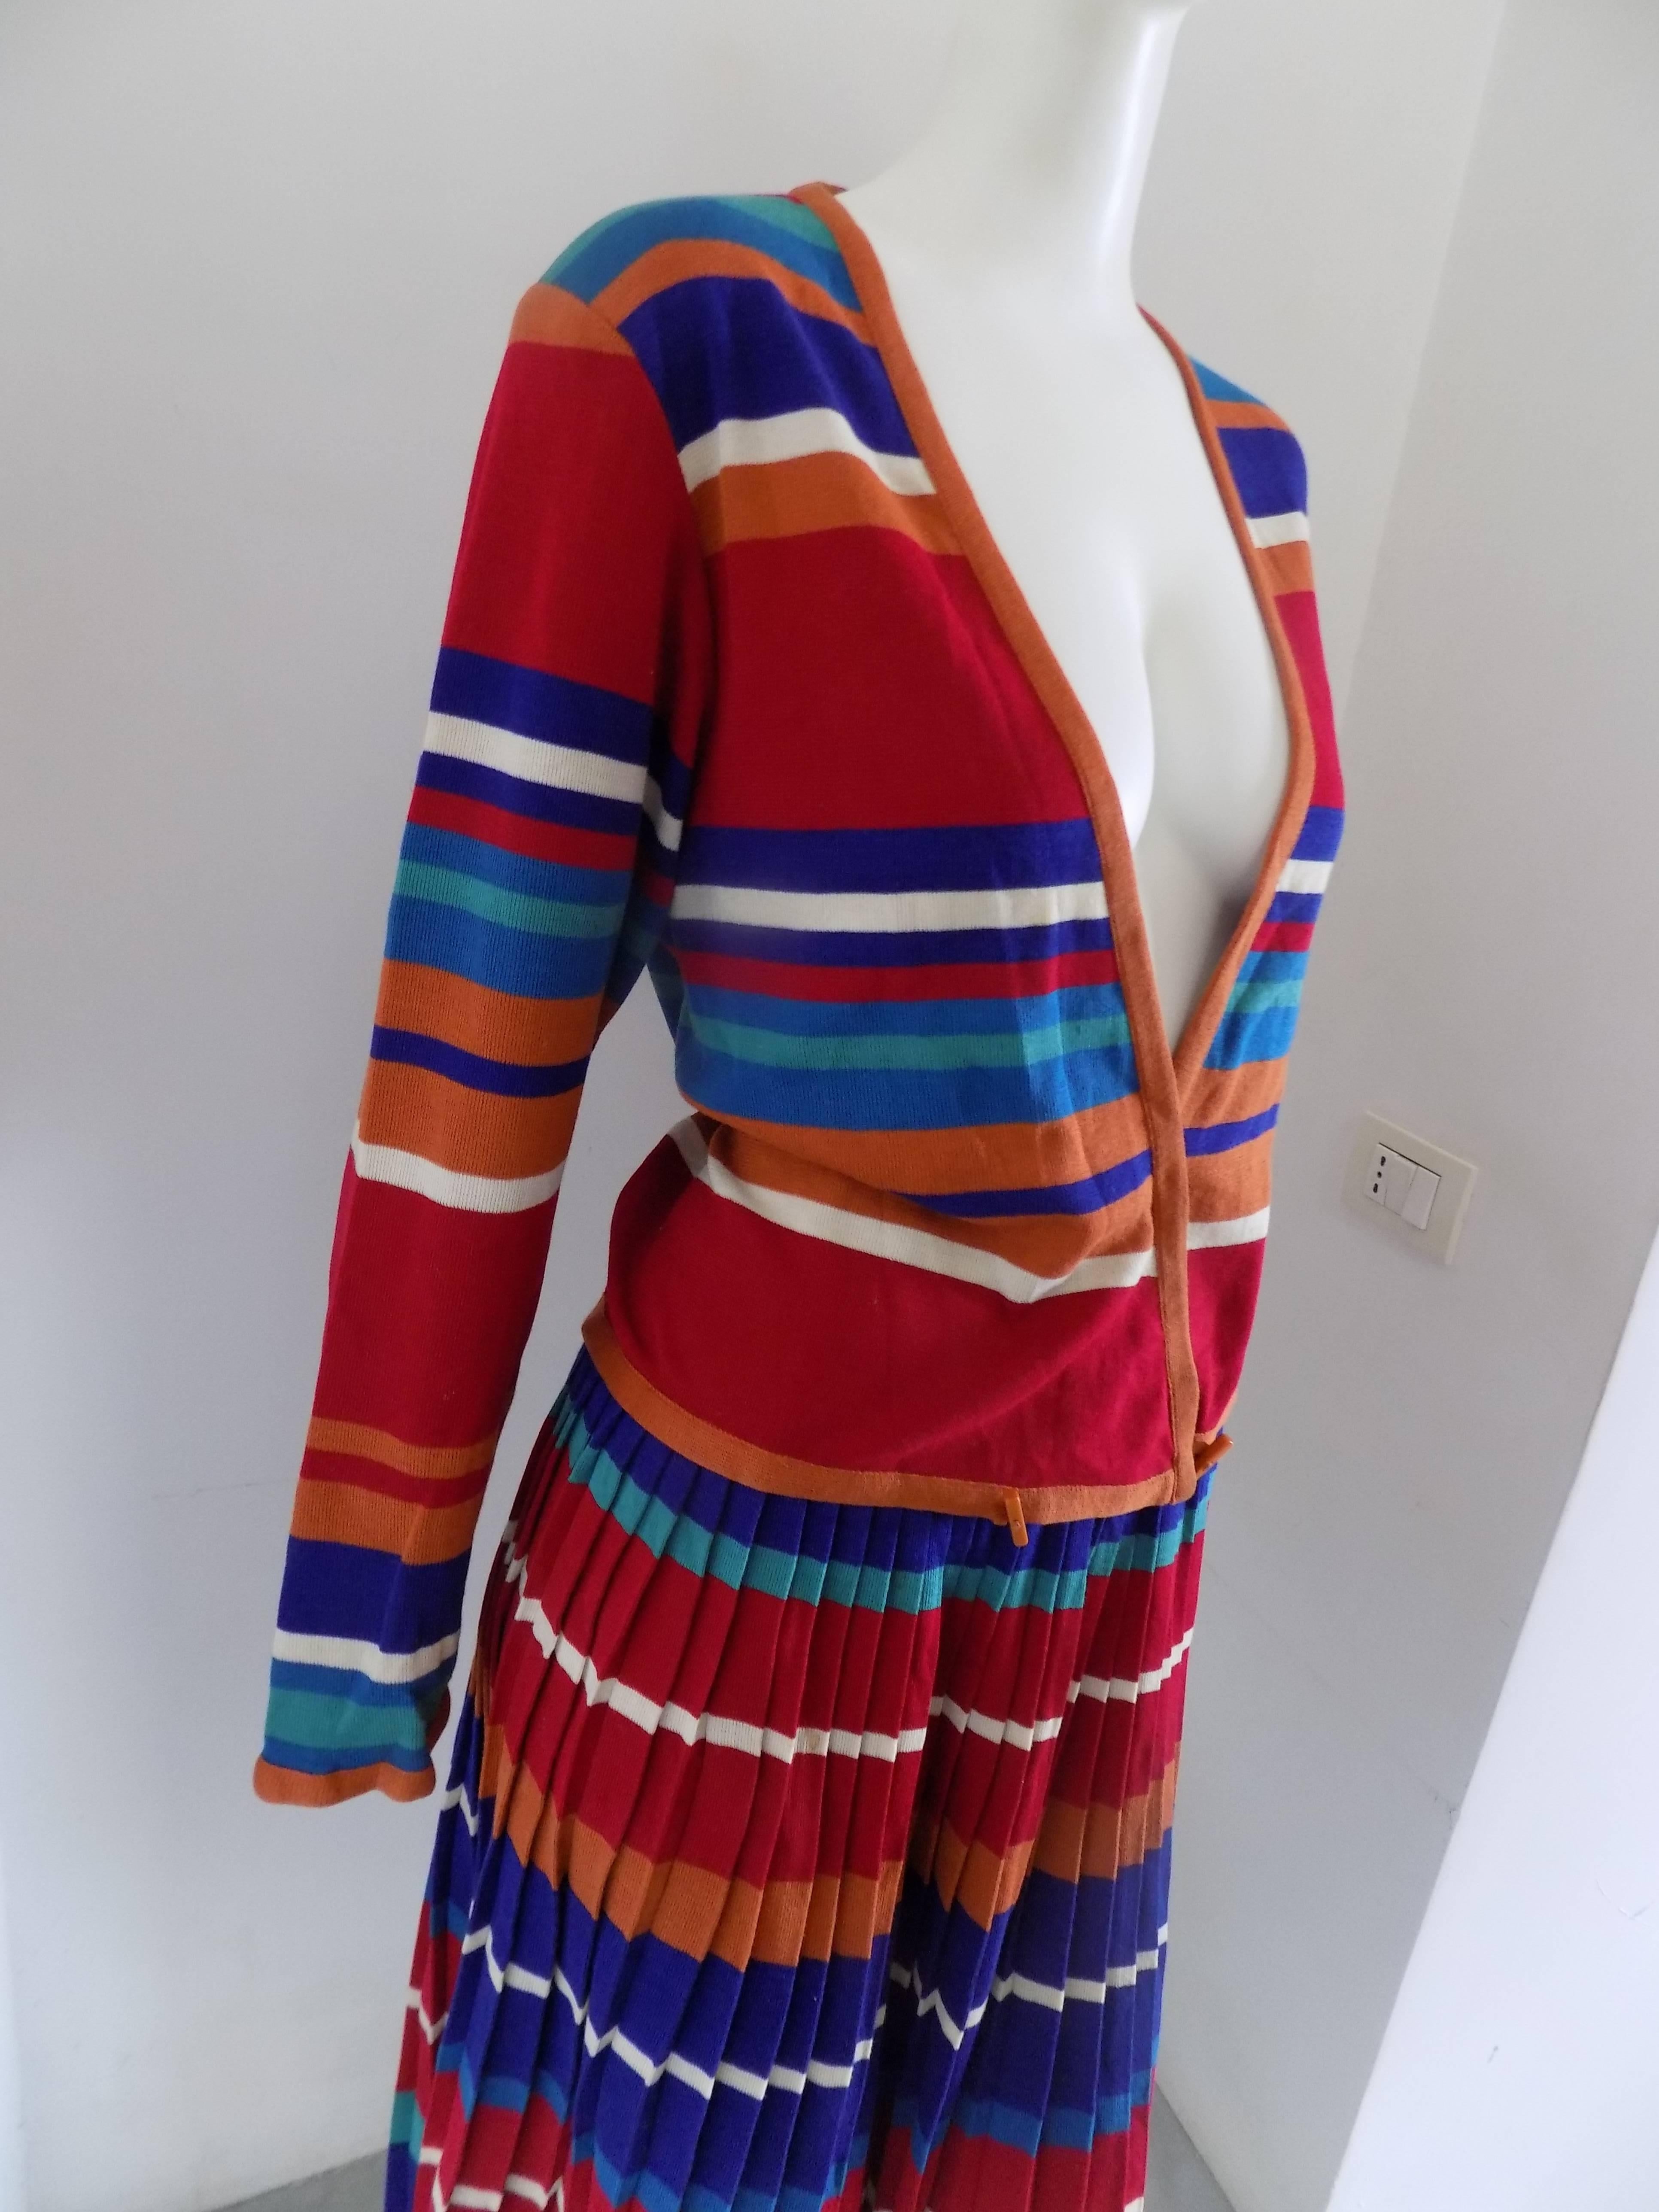 Missoni Multicolour Skirt Suits
Vintage sweater and skirt suit by Missoni totally made in italy in italian size range M
